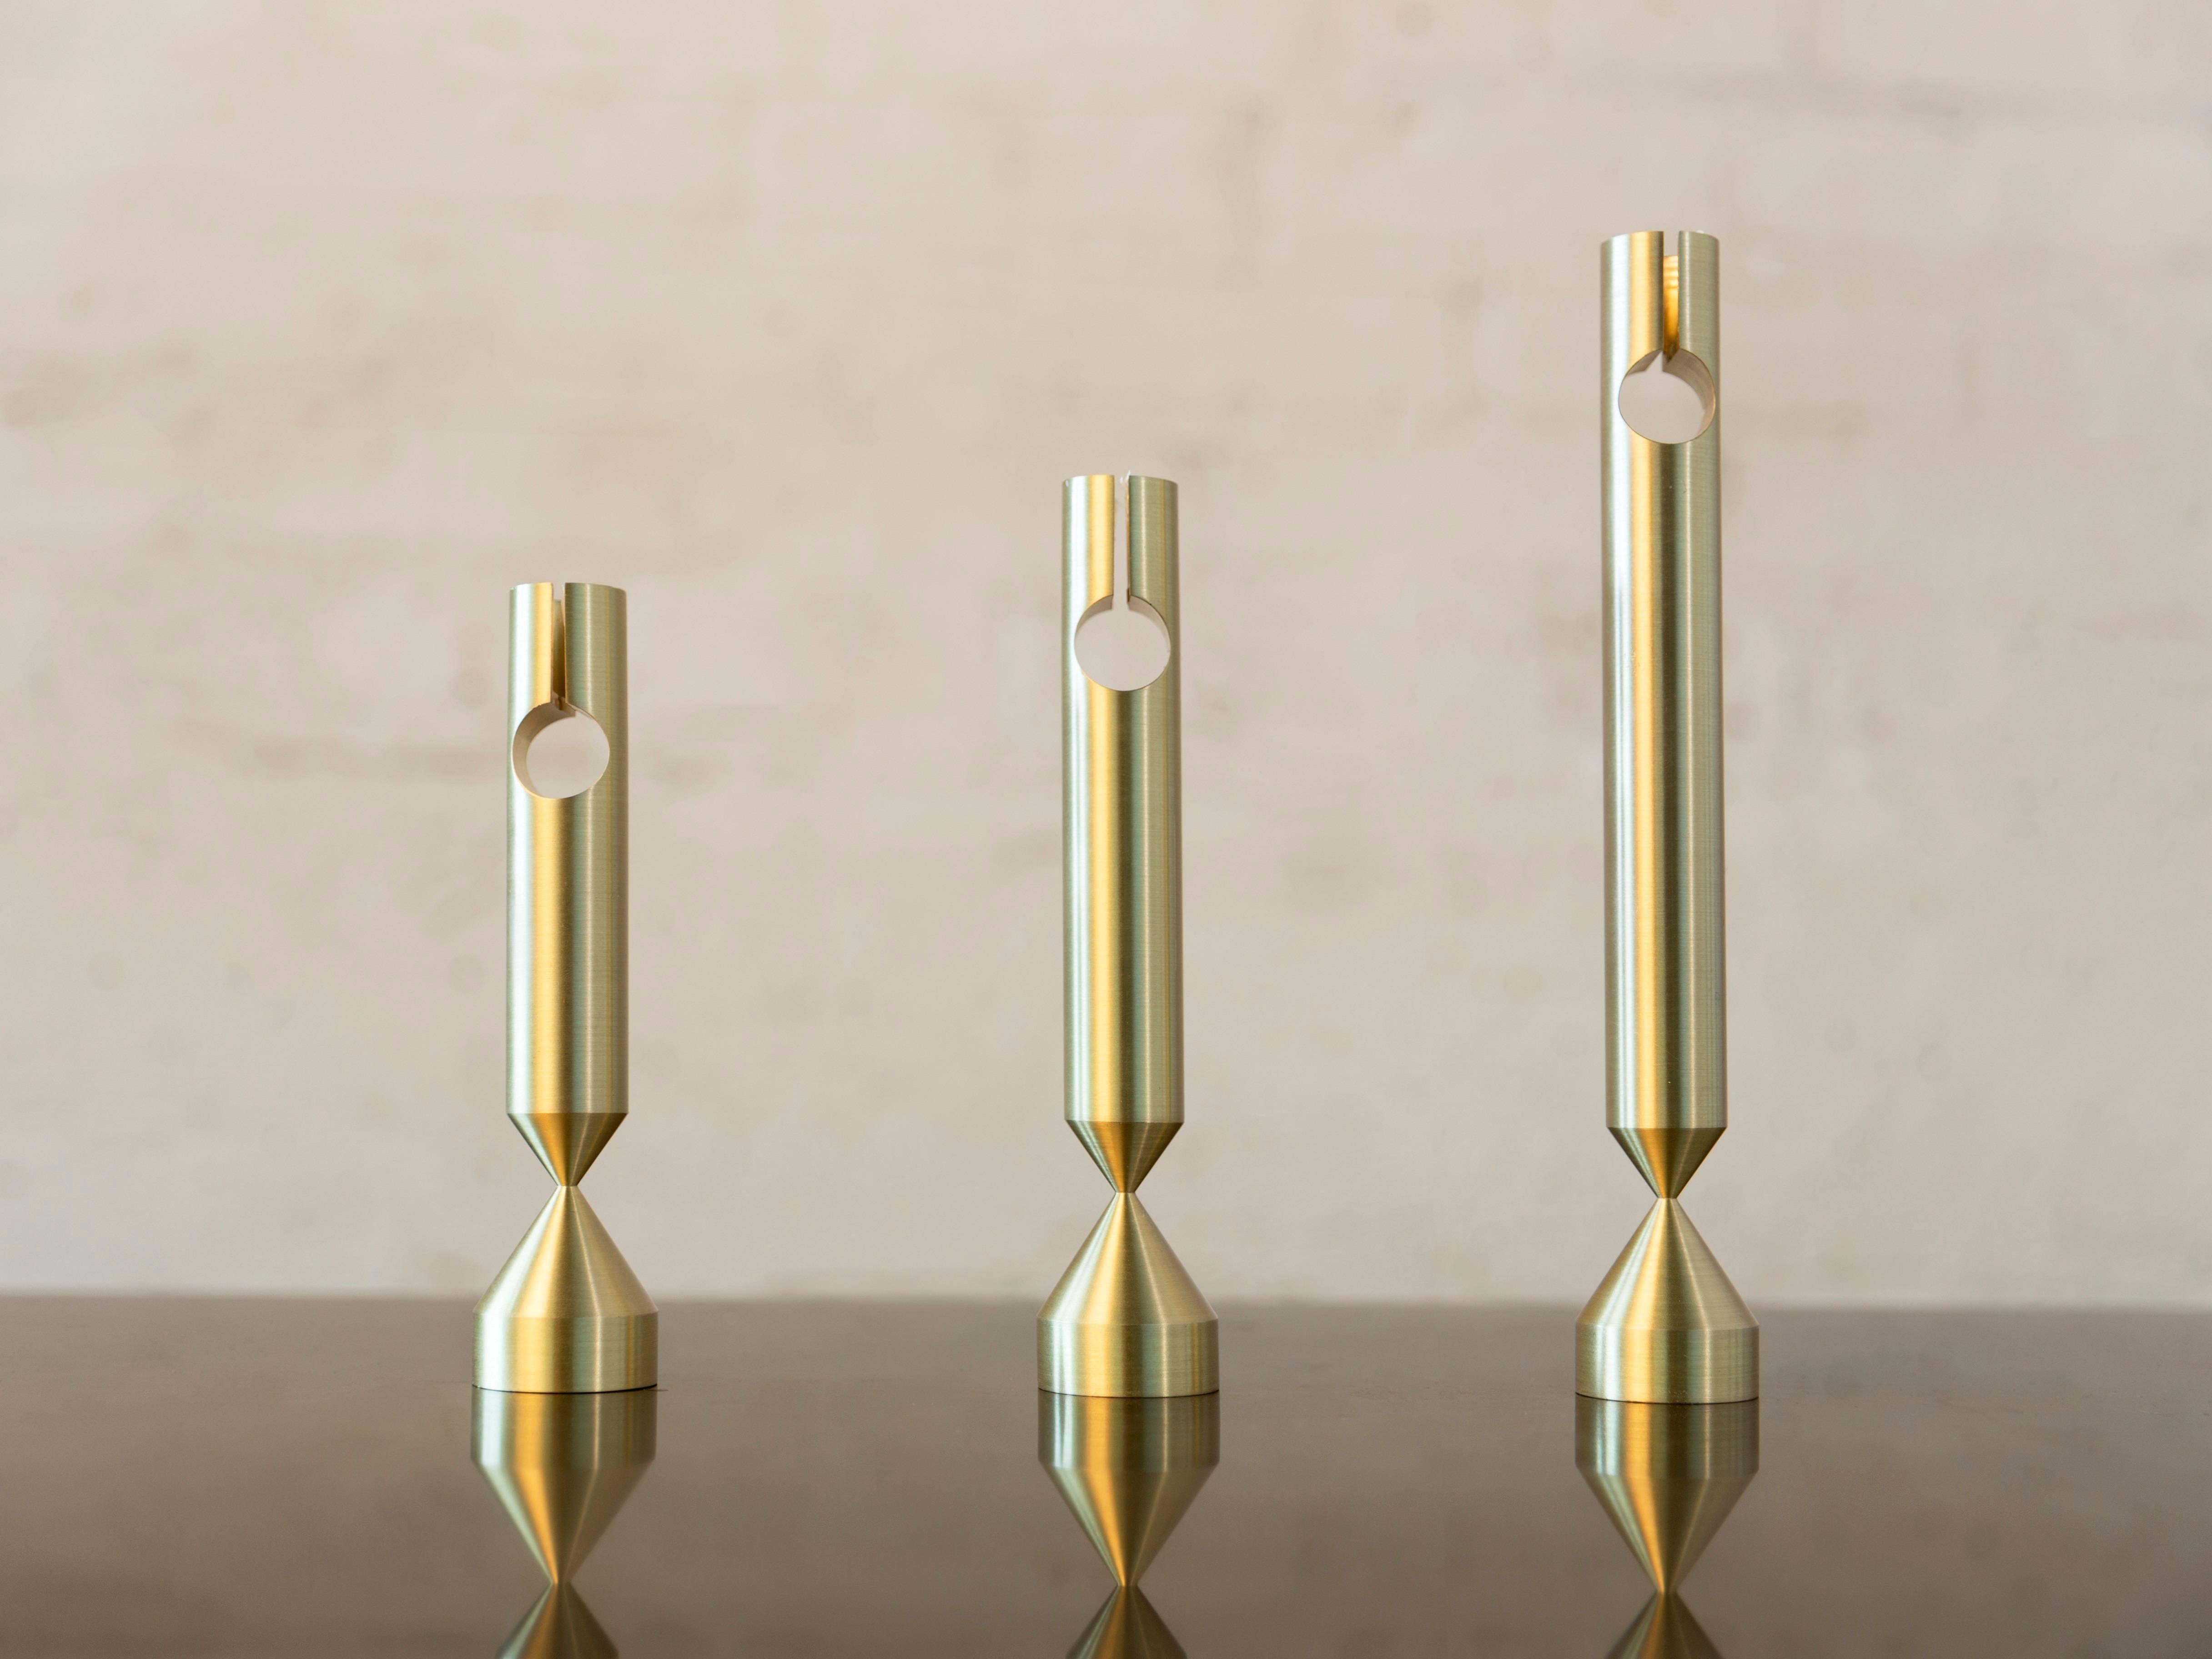 Modern Pillar Candlesticks with Three Sizes, Handcrafted in Chicago For Sale